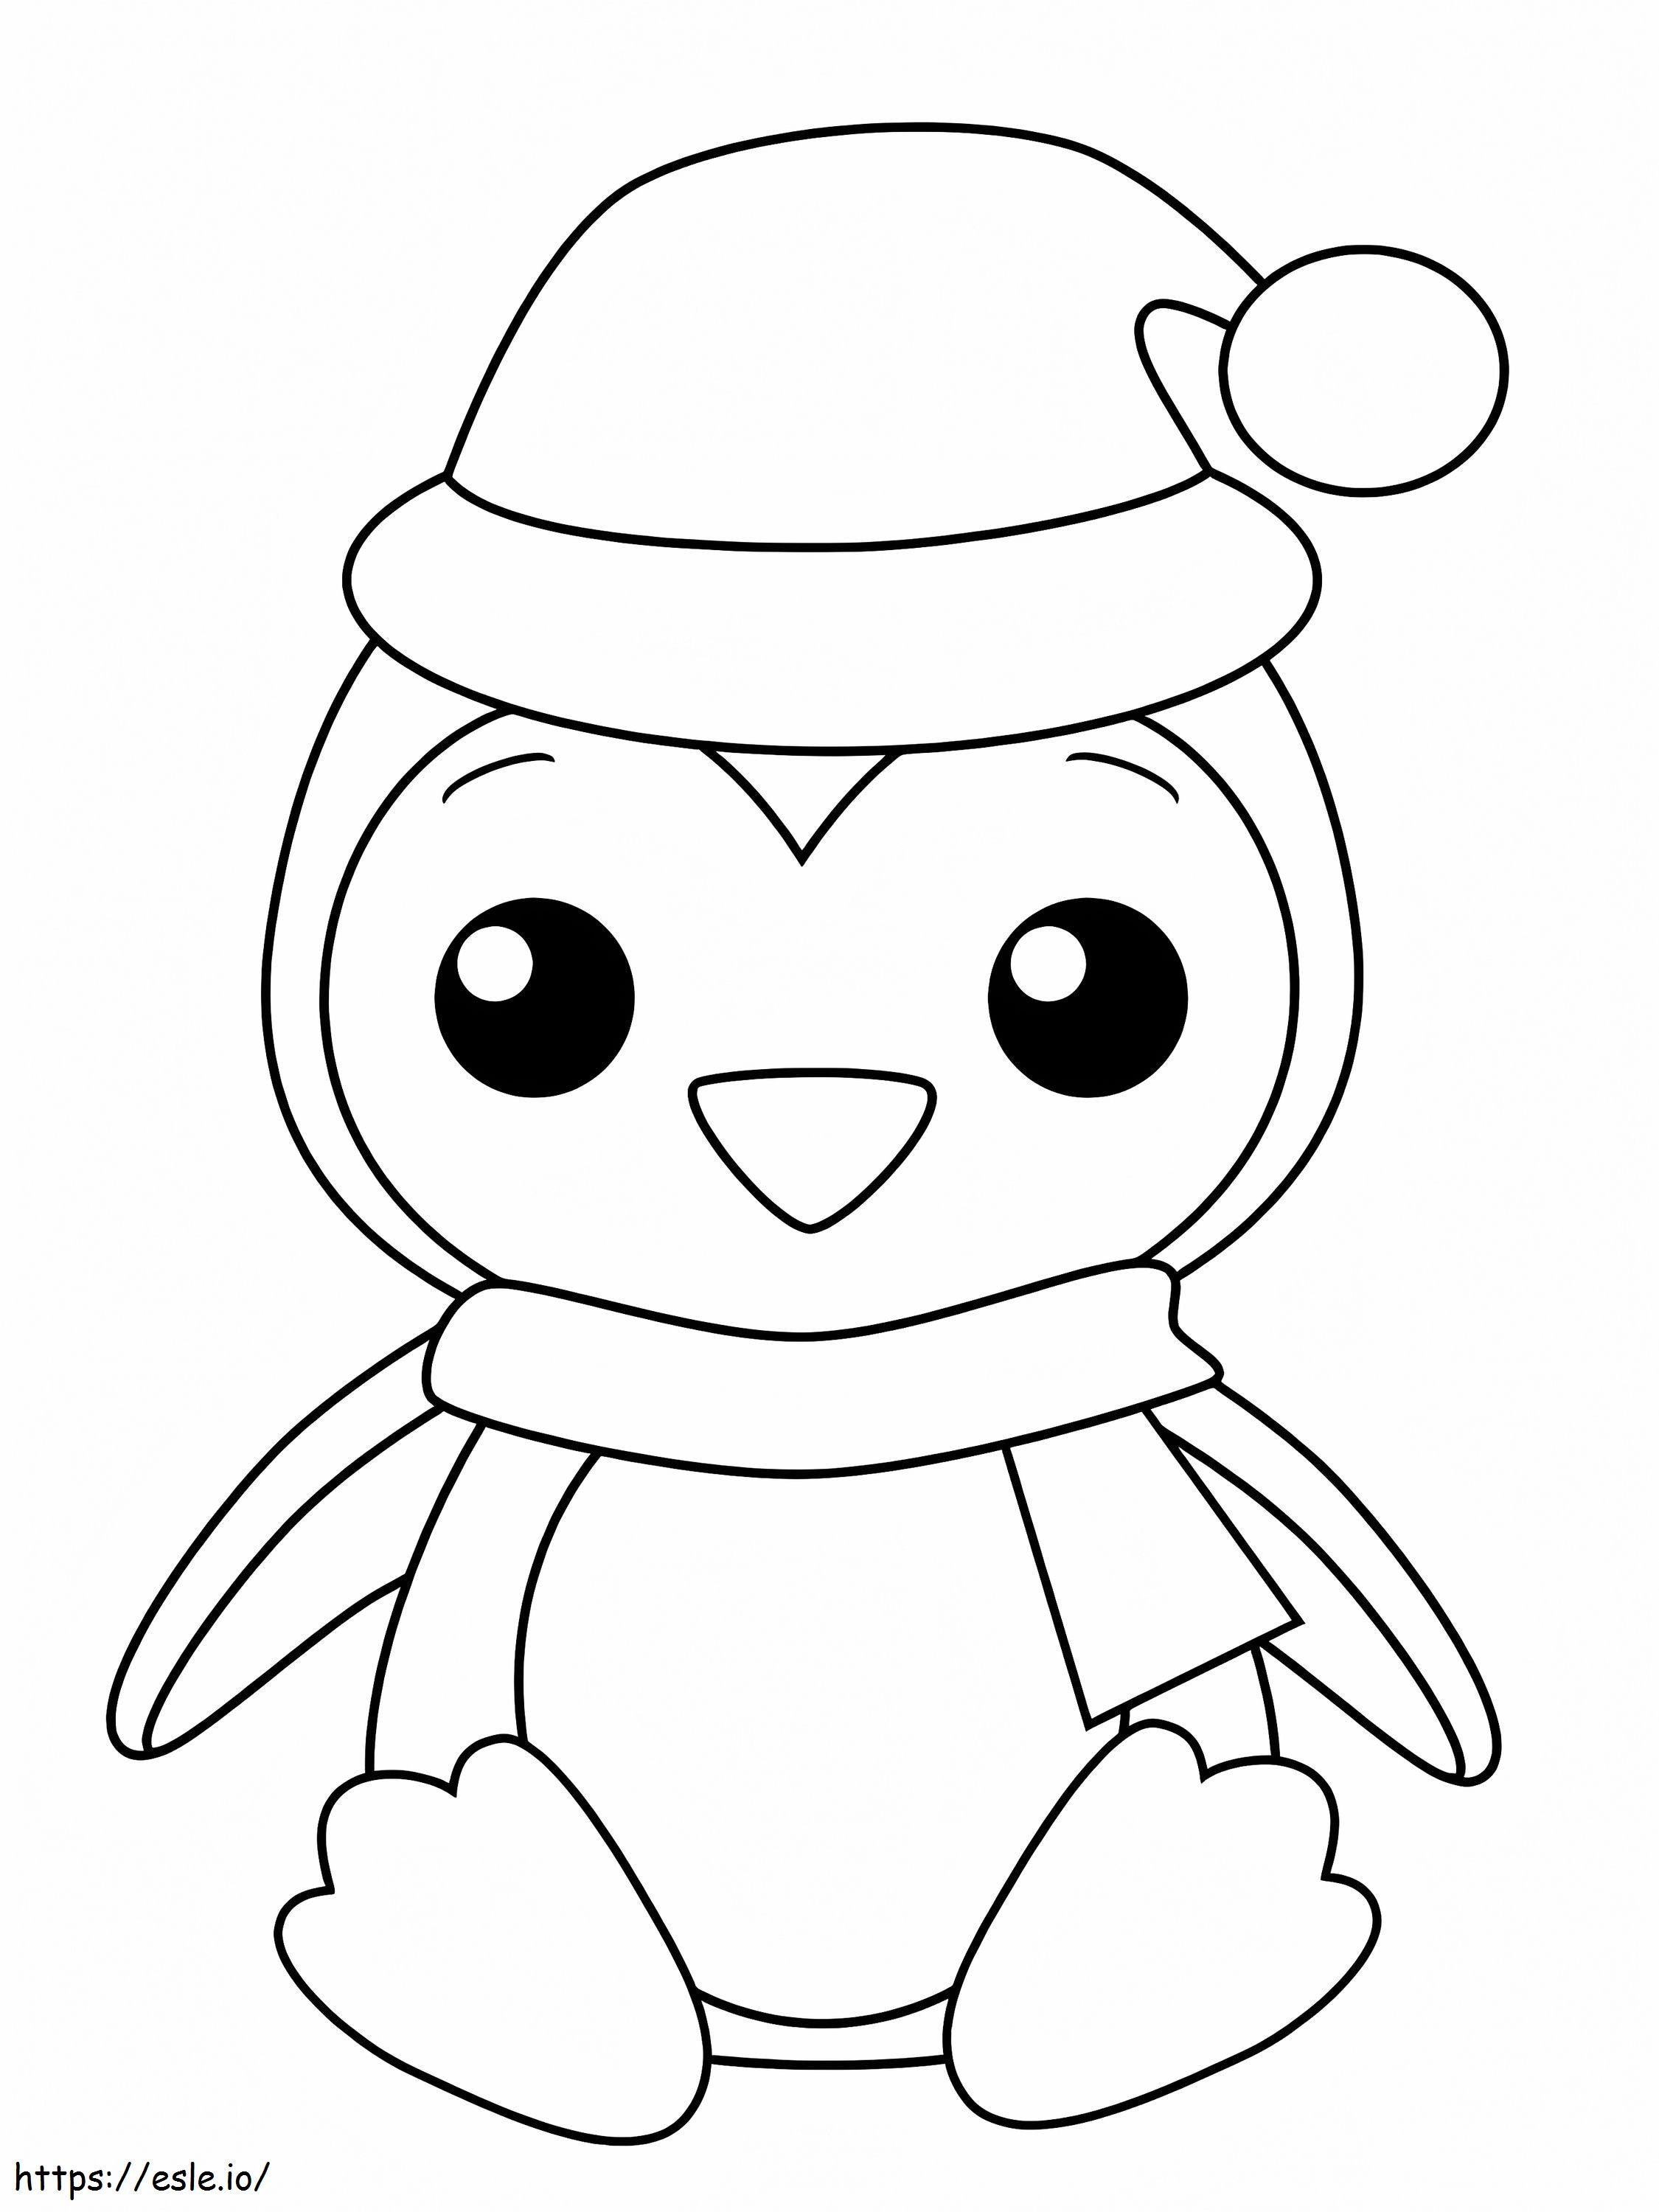 Penguin With Santa Hat coloring page